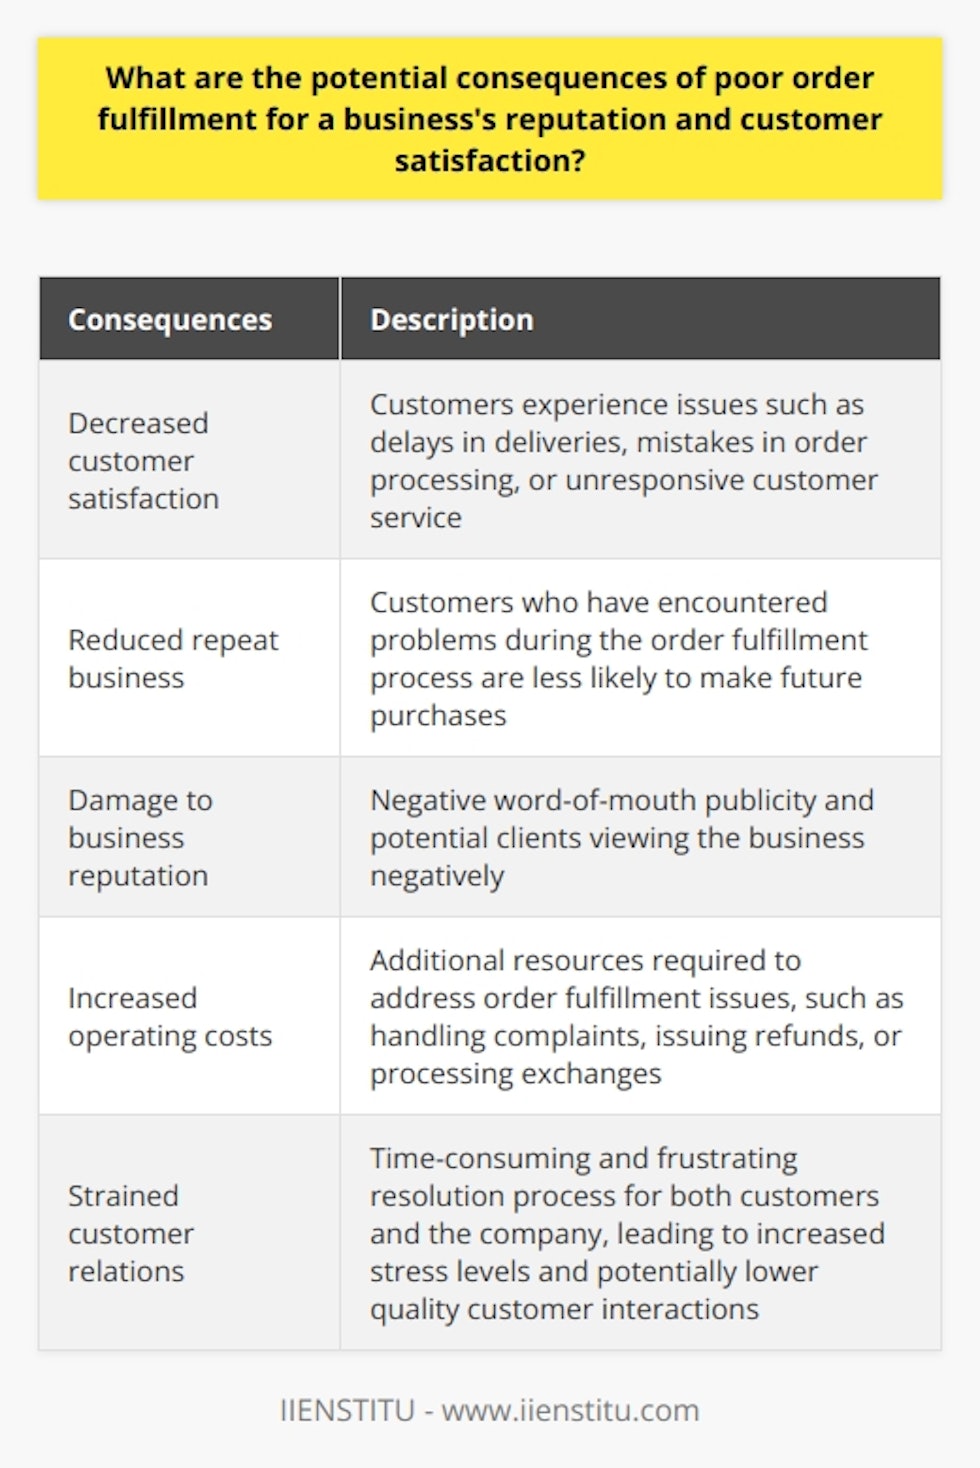 The potential consequences of poor order fulfillment for a business's reputation and customer satisfaction are significant. When customers experience issues such as delays in deliveries, mistakes in order processing, or unresponsive customer service, their overall satisfaction with the business decreases. This dissatisfaction can lead to customer complaints and negative word-of-mouth publicity, which can harm the company's reputation.Another consequence is the potential loss of repeat business. Customers who have encountered problems during the order fulfillment process are less likely to make future purchases from the same business. This reduction in repeat business can lower the company's sales figures, negatively impacting its revenue and profit margins.Furthermore, poor order fulfillment can damage the business's reputation. As dissatisfied customers share their negative experiences, potential clients may view the business in a negative light. Over time, a damaged reputation can erode trust in the company's products or services, making it difficult to attract and retain customers.Not only does poor order fulfillment affect customer satisfaction and business reputation, but it can also lead to increased operating costs. Addressing issues in order fulfillment often requires additional resources, such as extra time spent on handling customer complaints, issuing refunds, or processing exchanges. These additional expenditures can strain the company's financial resources and reduce overall efficiency.Finally, poor order fulfillment can put a strain on customer relations. Resolving problems related to fulfillment can be time-consuming and frustrating for both the customer and the company. This can lead to increased stress levels for customer service teams and potentially result in a decrease in the quality of customer interactions.In conclusion, the consequences of poor order fulfillment for a business are numerous and impactful. It can result in decreased customer satisfaction, reduced repeat business, damaged reputation, higher operating costs, and strained customer relations. To ensure long-term success, businesses should prioritize efficient and timely order fulfillment processes.